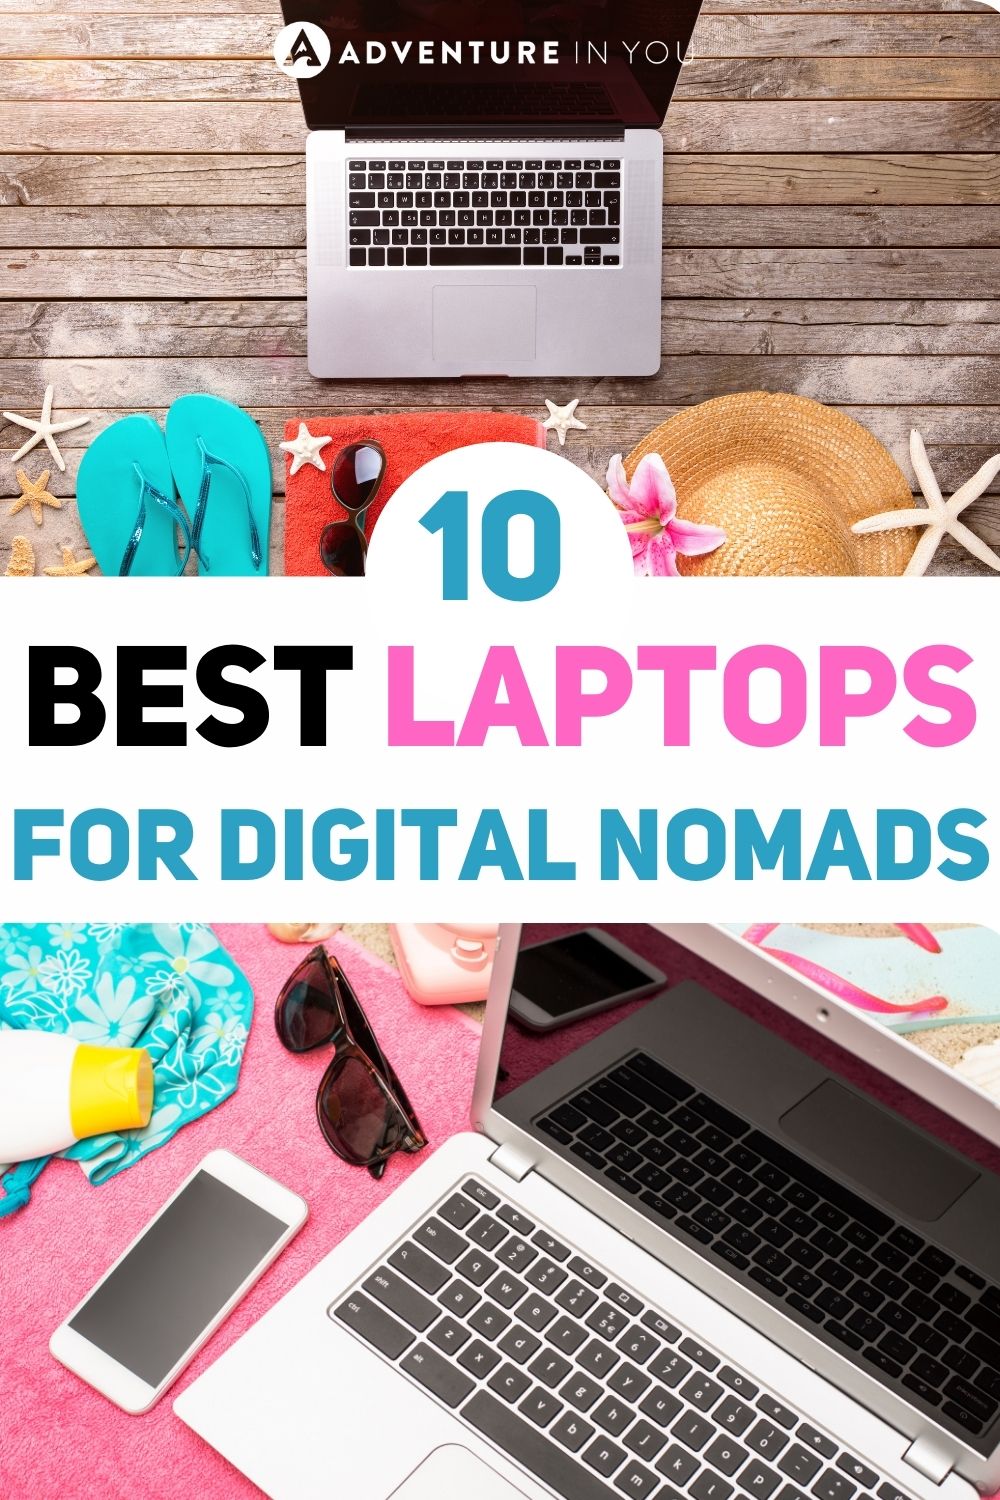 Best Laptops for Digital Nomads | If you are a digital nomad looking for the best laptop that will meet your needs as a digital nomad, look no further as we are presenting to you the list of the best laptop for digital nomads! #laptop #digitalnomad #gear #remotework #traveljob #digitalnomadlaptop